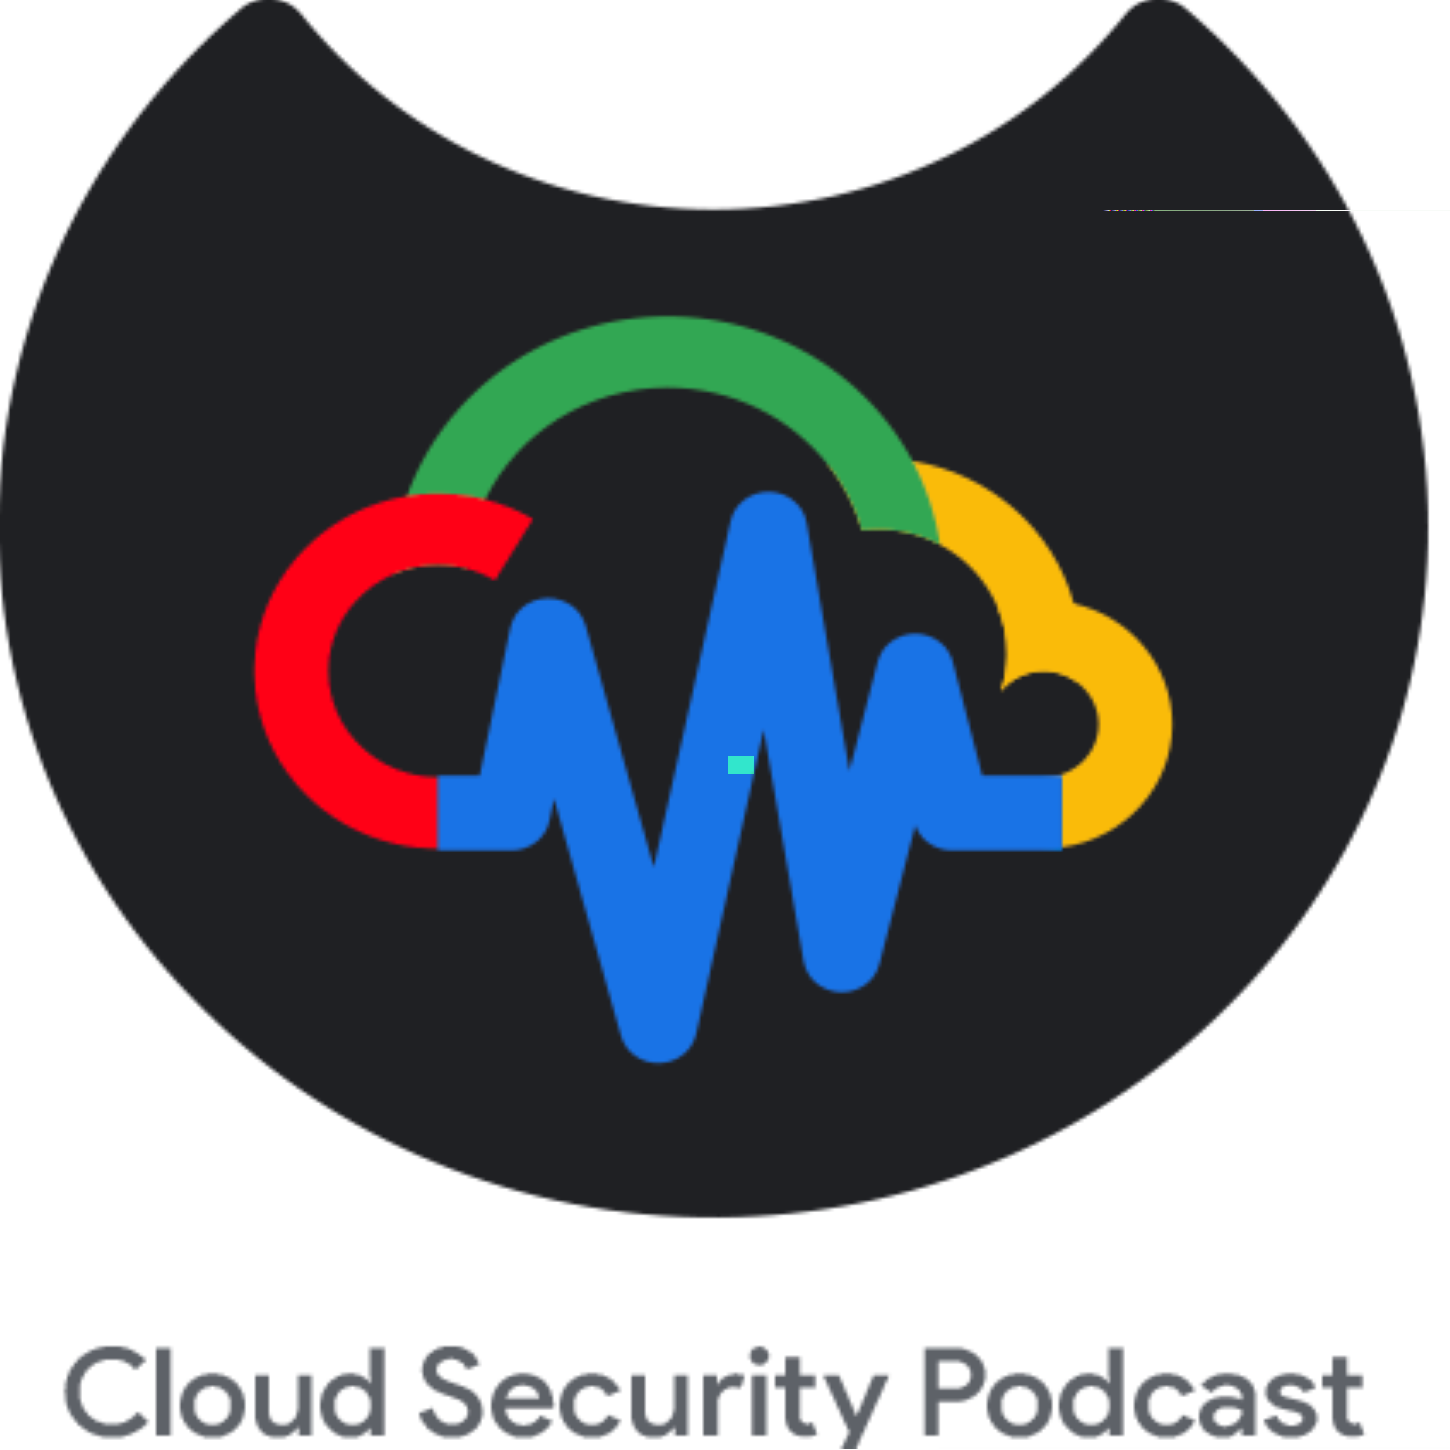 A highlight from EP94 Meet Cloud Security Acronyms with Anna Belak